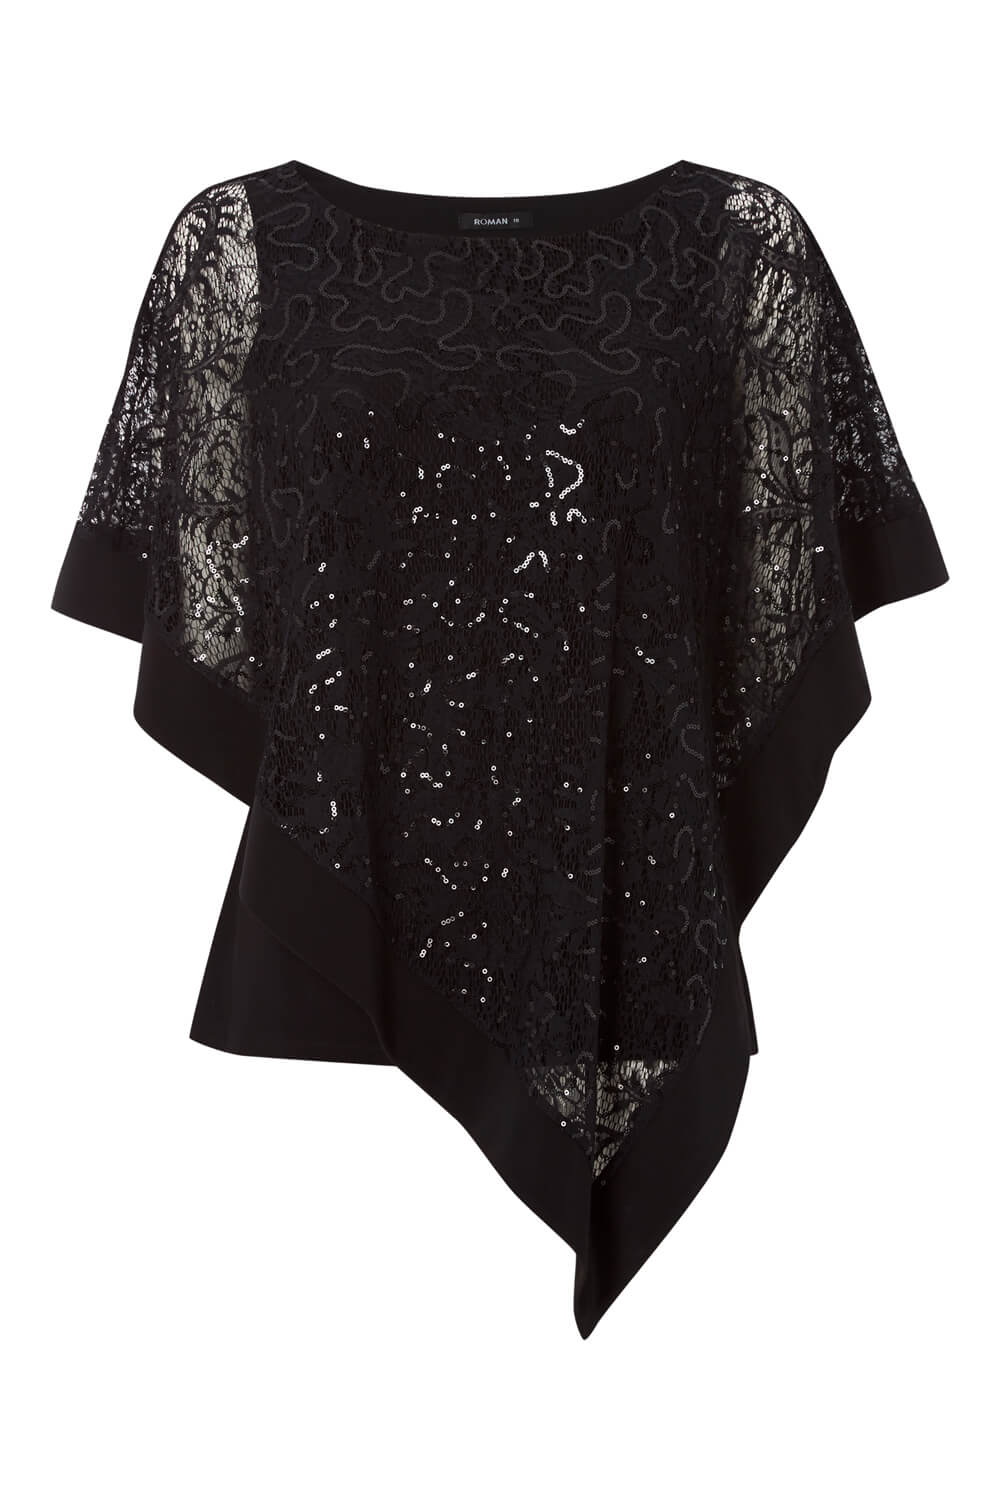 Black Lace Sequin Overlay Top, Image 4 of 4